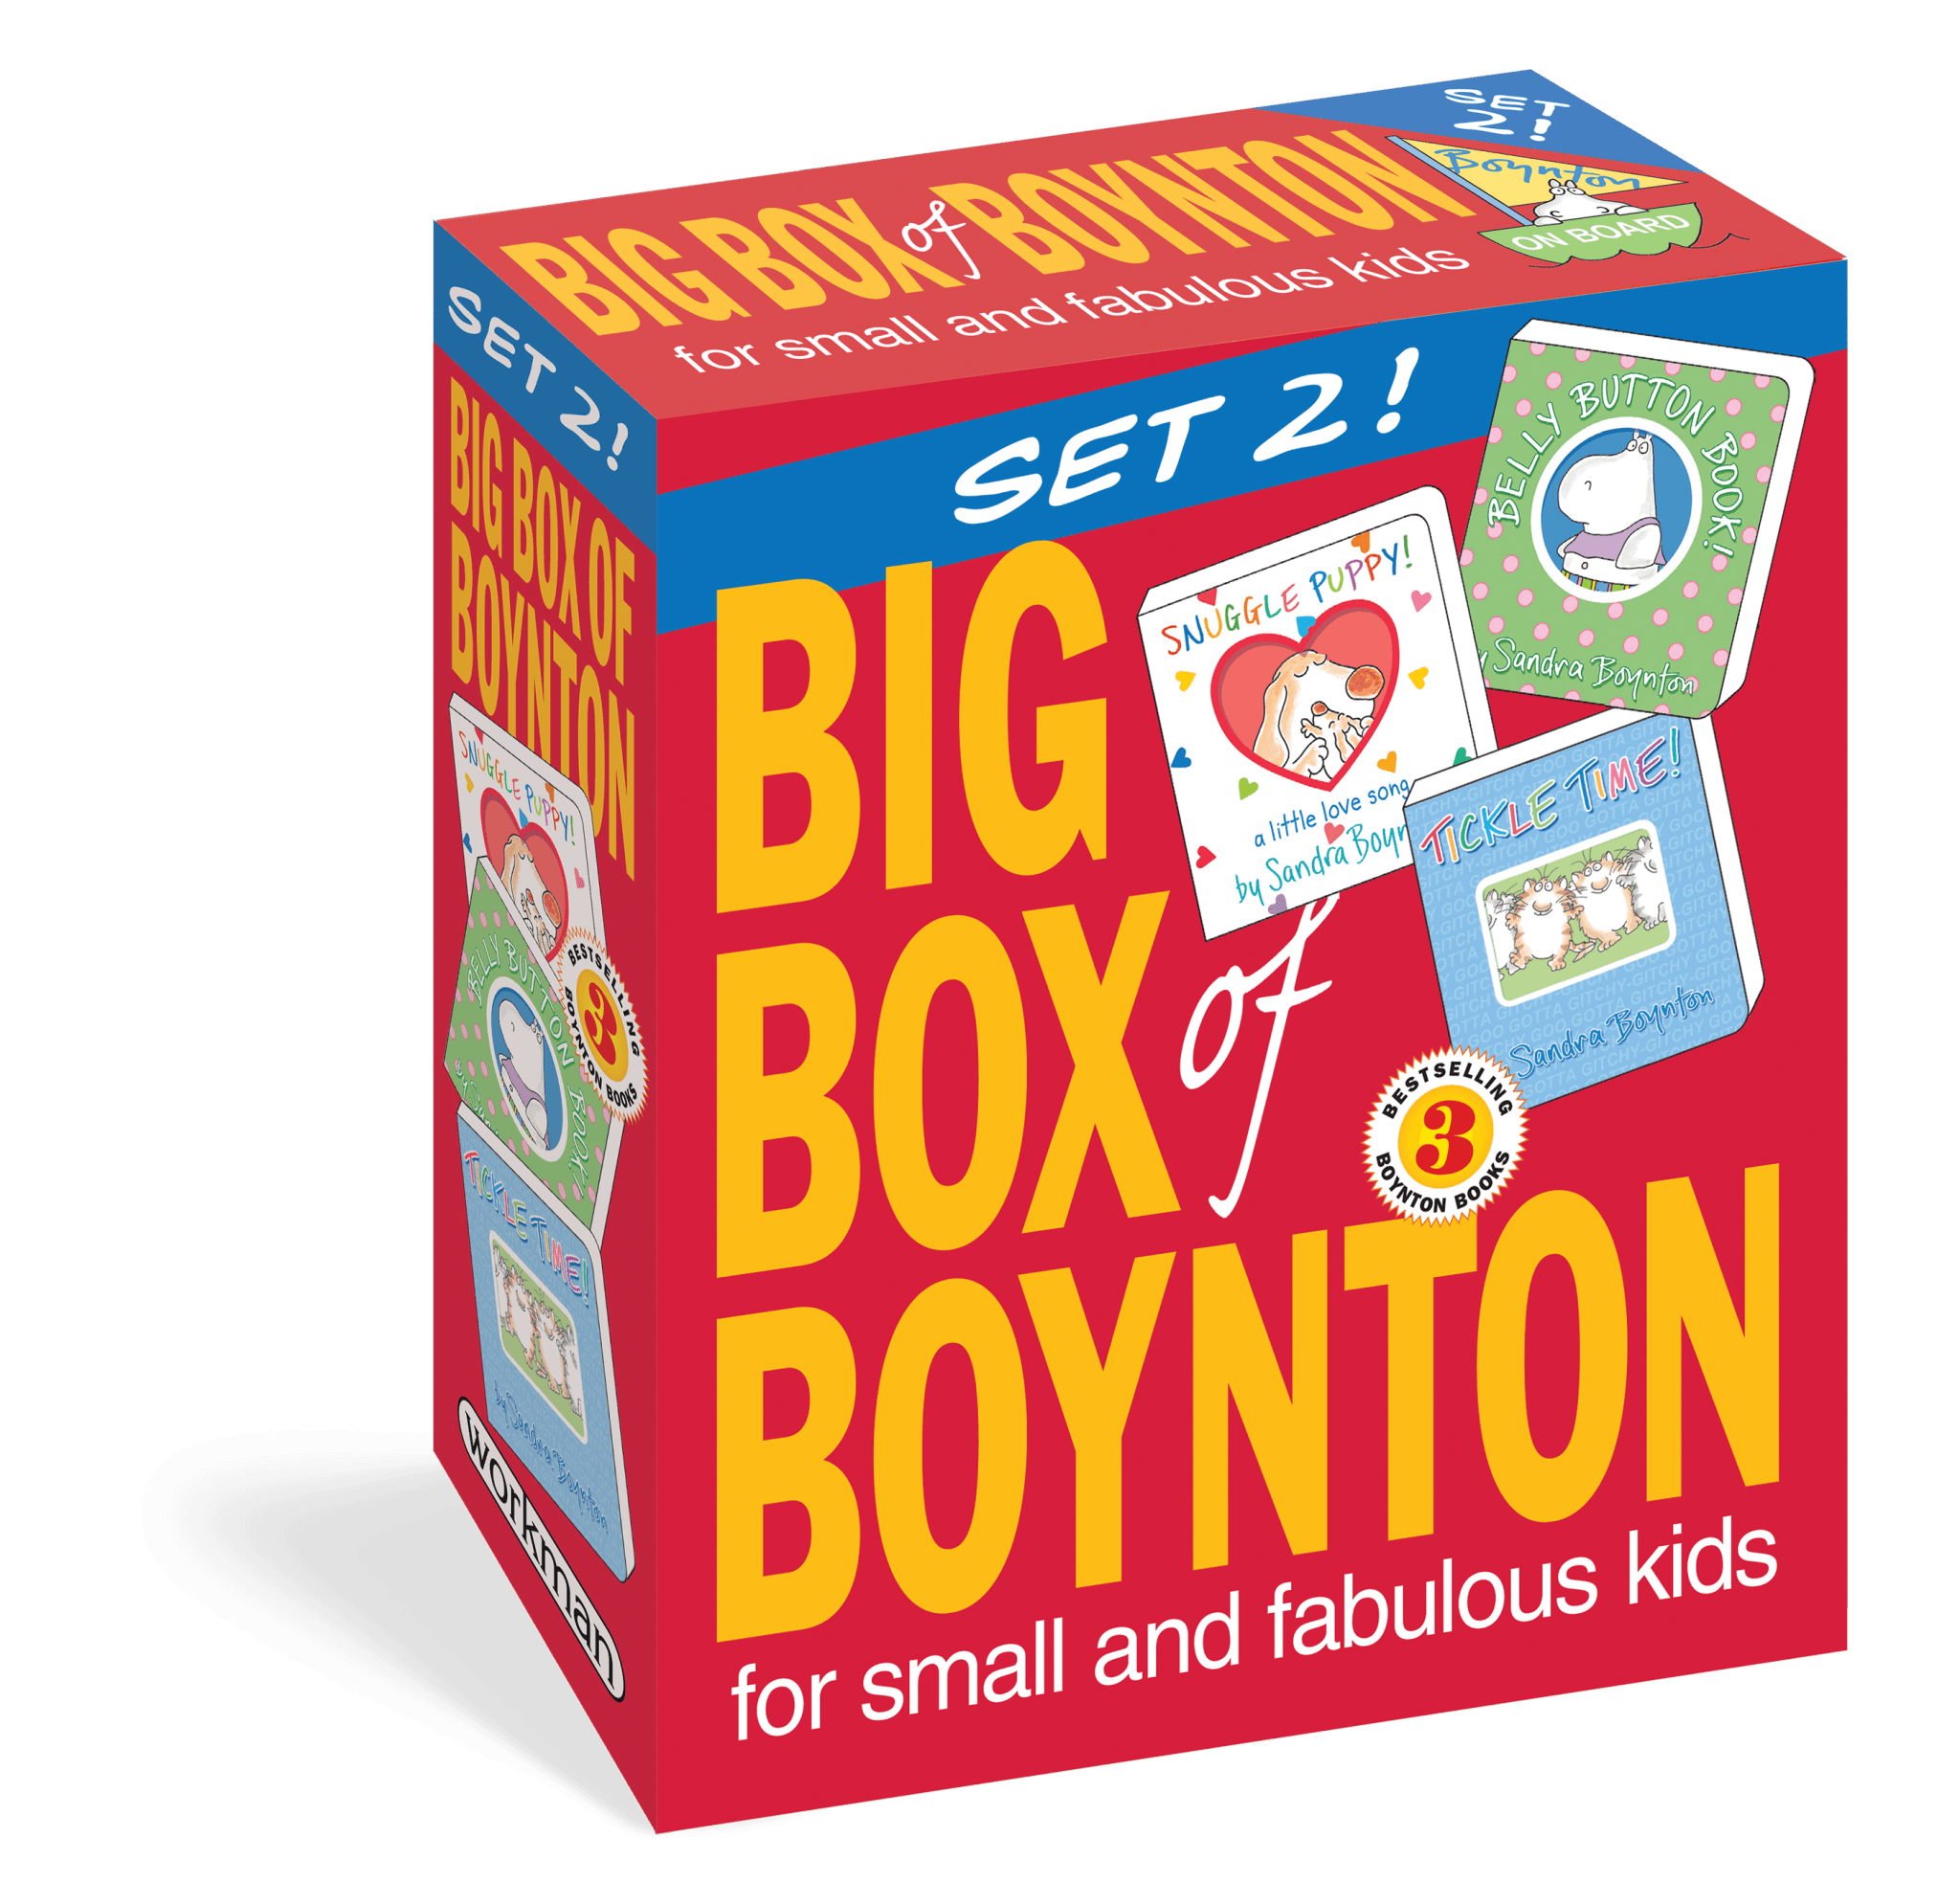 Bonyton Big Box Set 2 Board Book, Snuggle Puppy! Belly Button Book! Tickle Time! - ANB Baby -Books